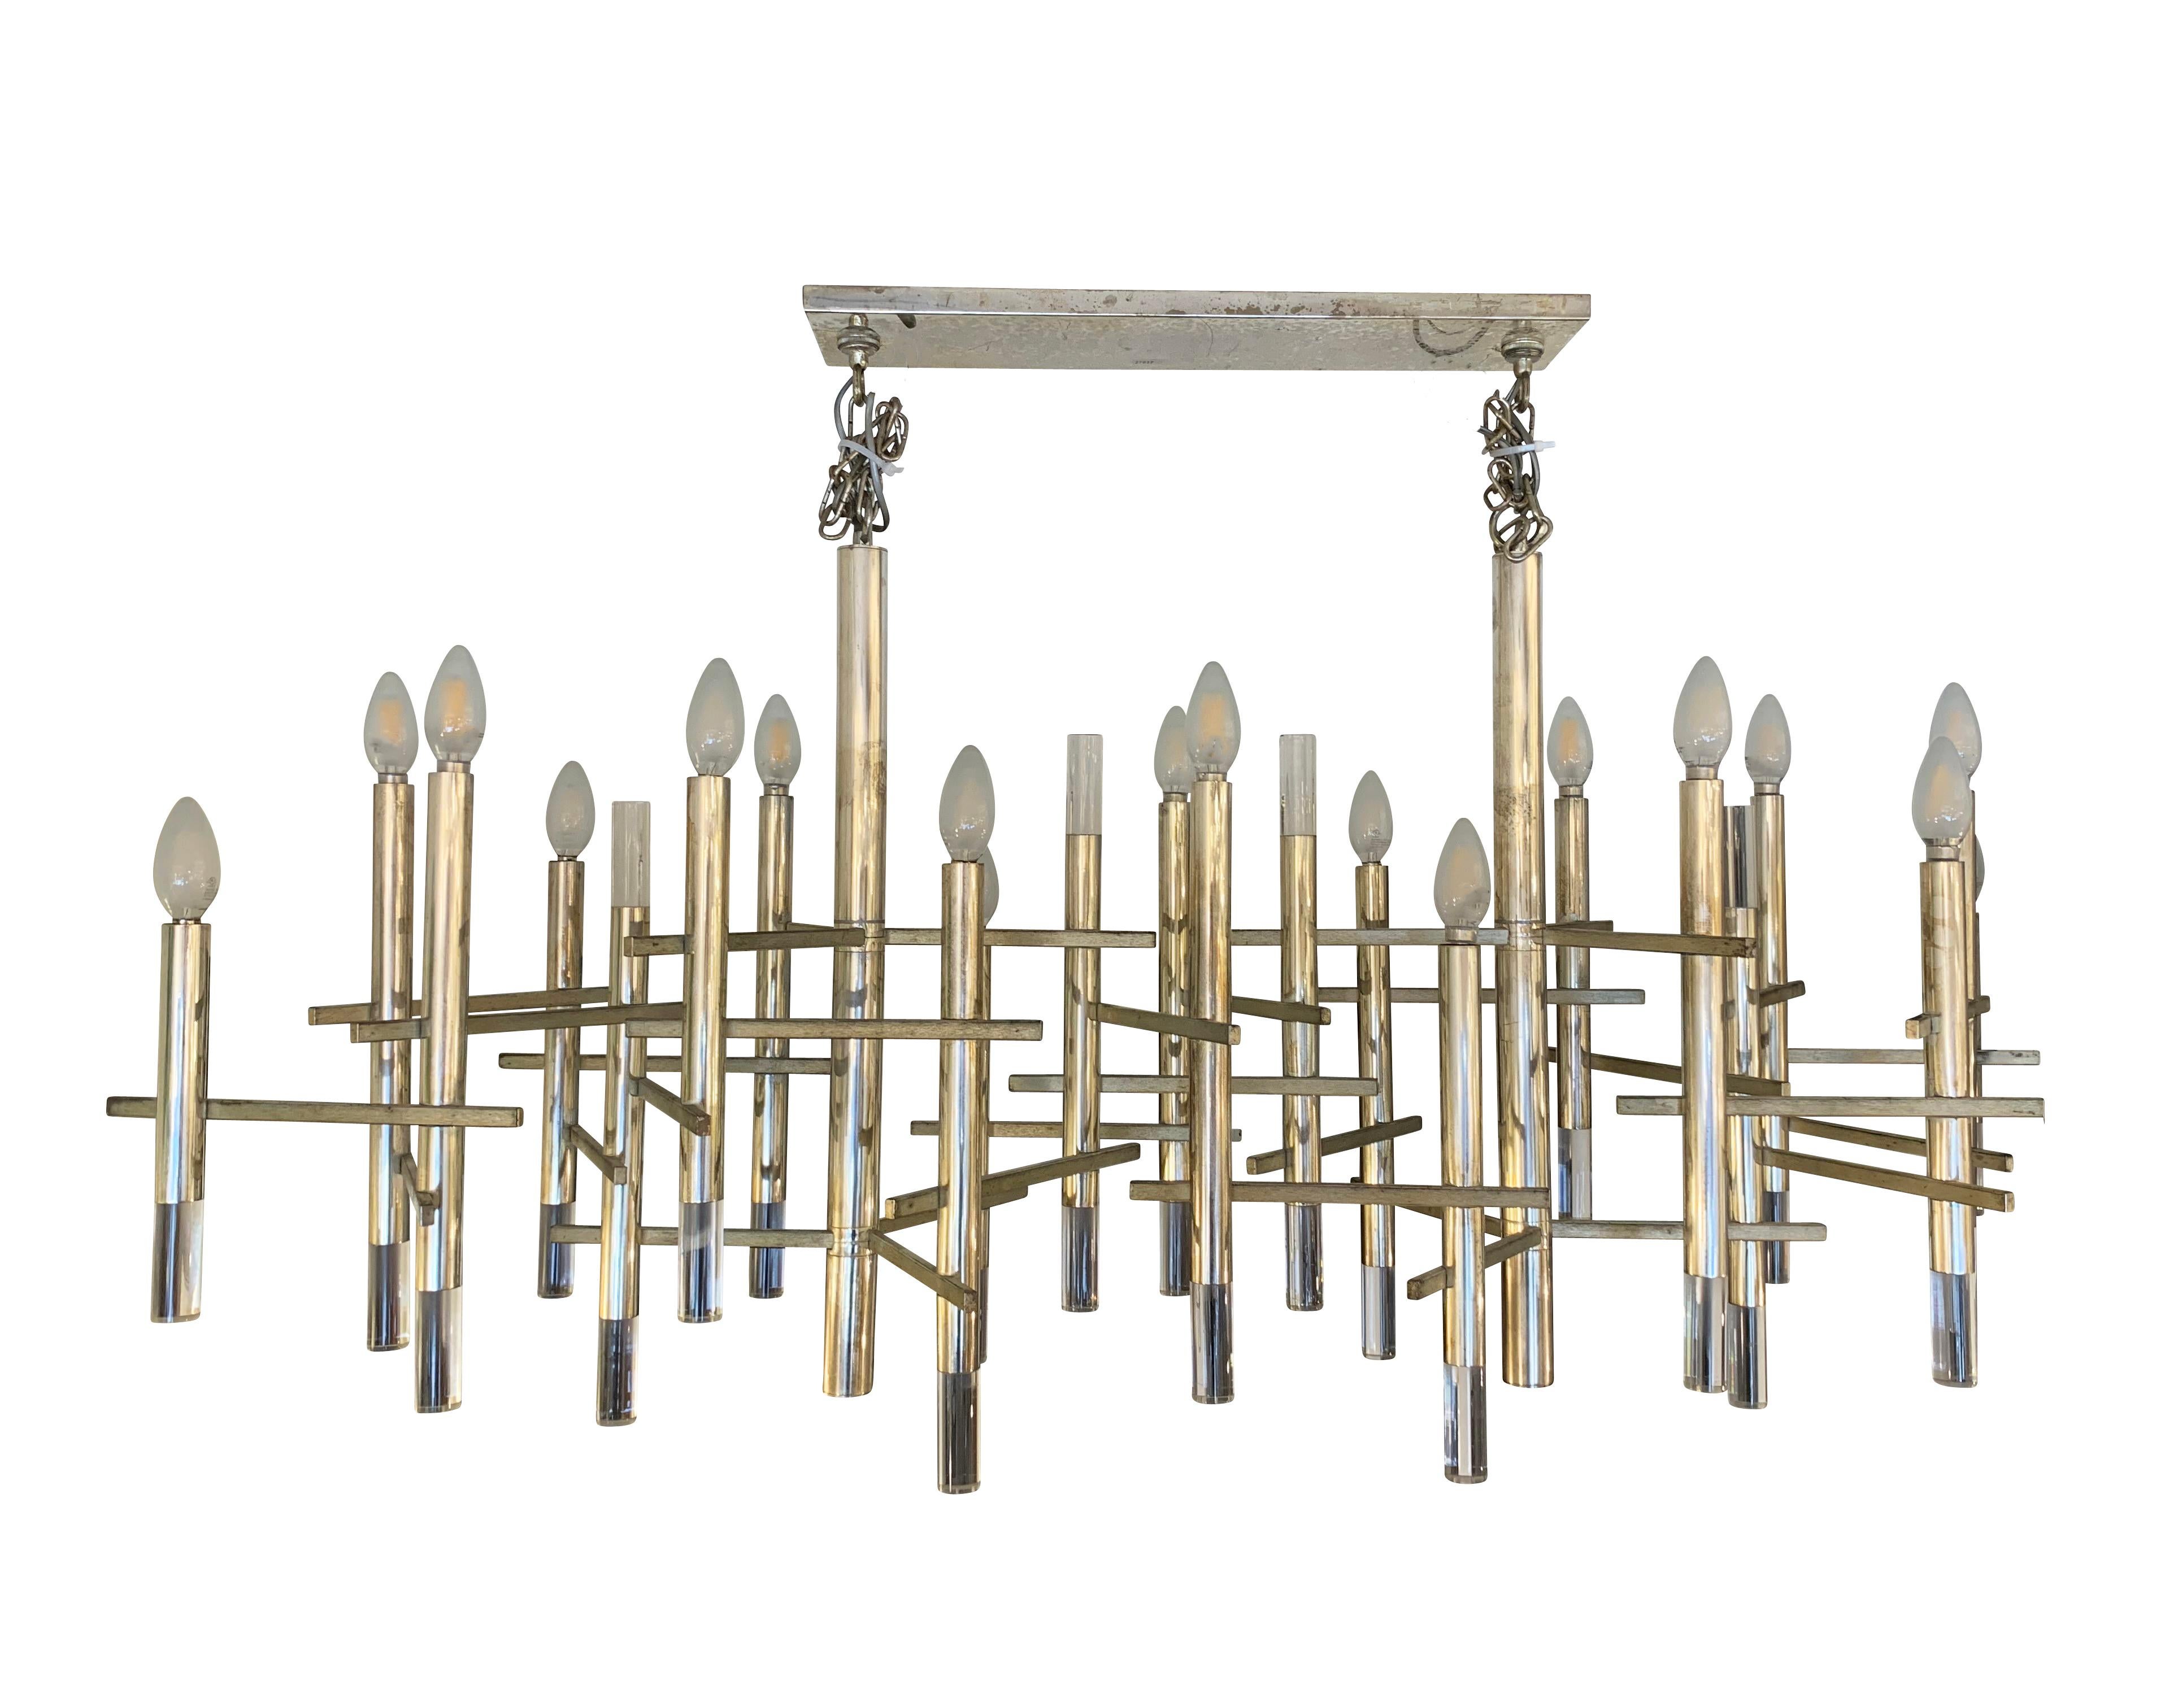 Large nickel chandelier with acrylic accents designed by Gaetano Sciolari in the 1960s after he visited New York and remained in owe of its skyscrapers. Holds 18 candelabra sockets and hangs from a rectangular canopy with two chains.

Condition: